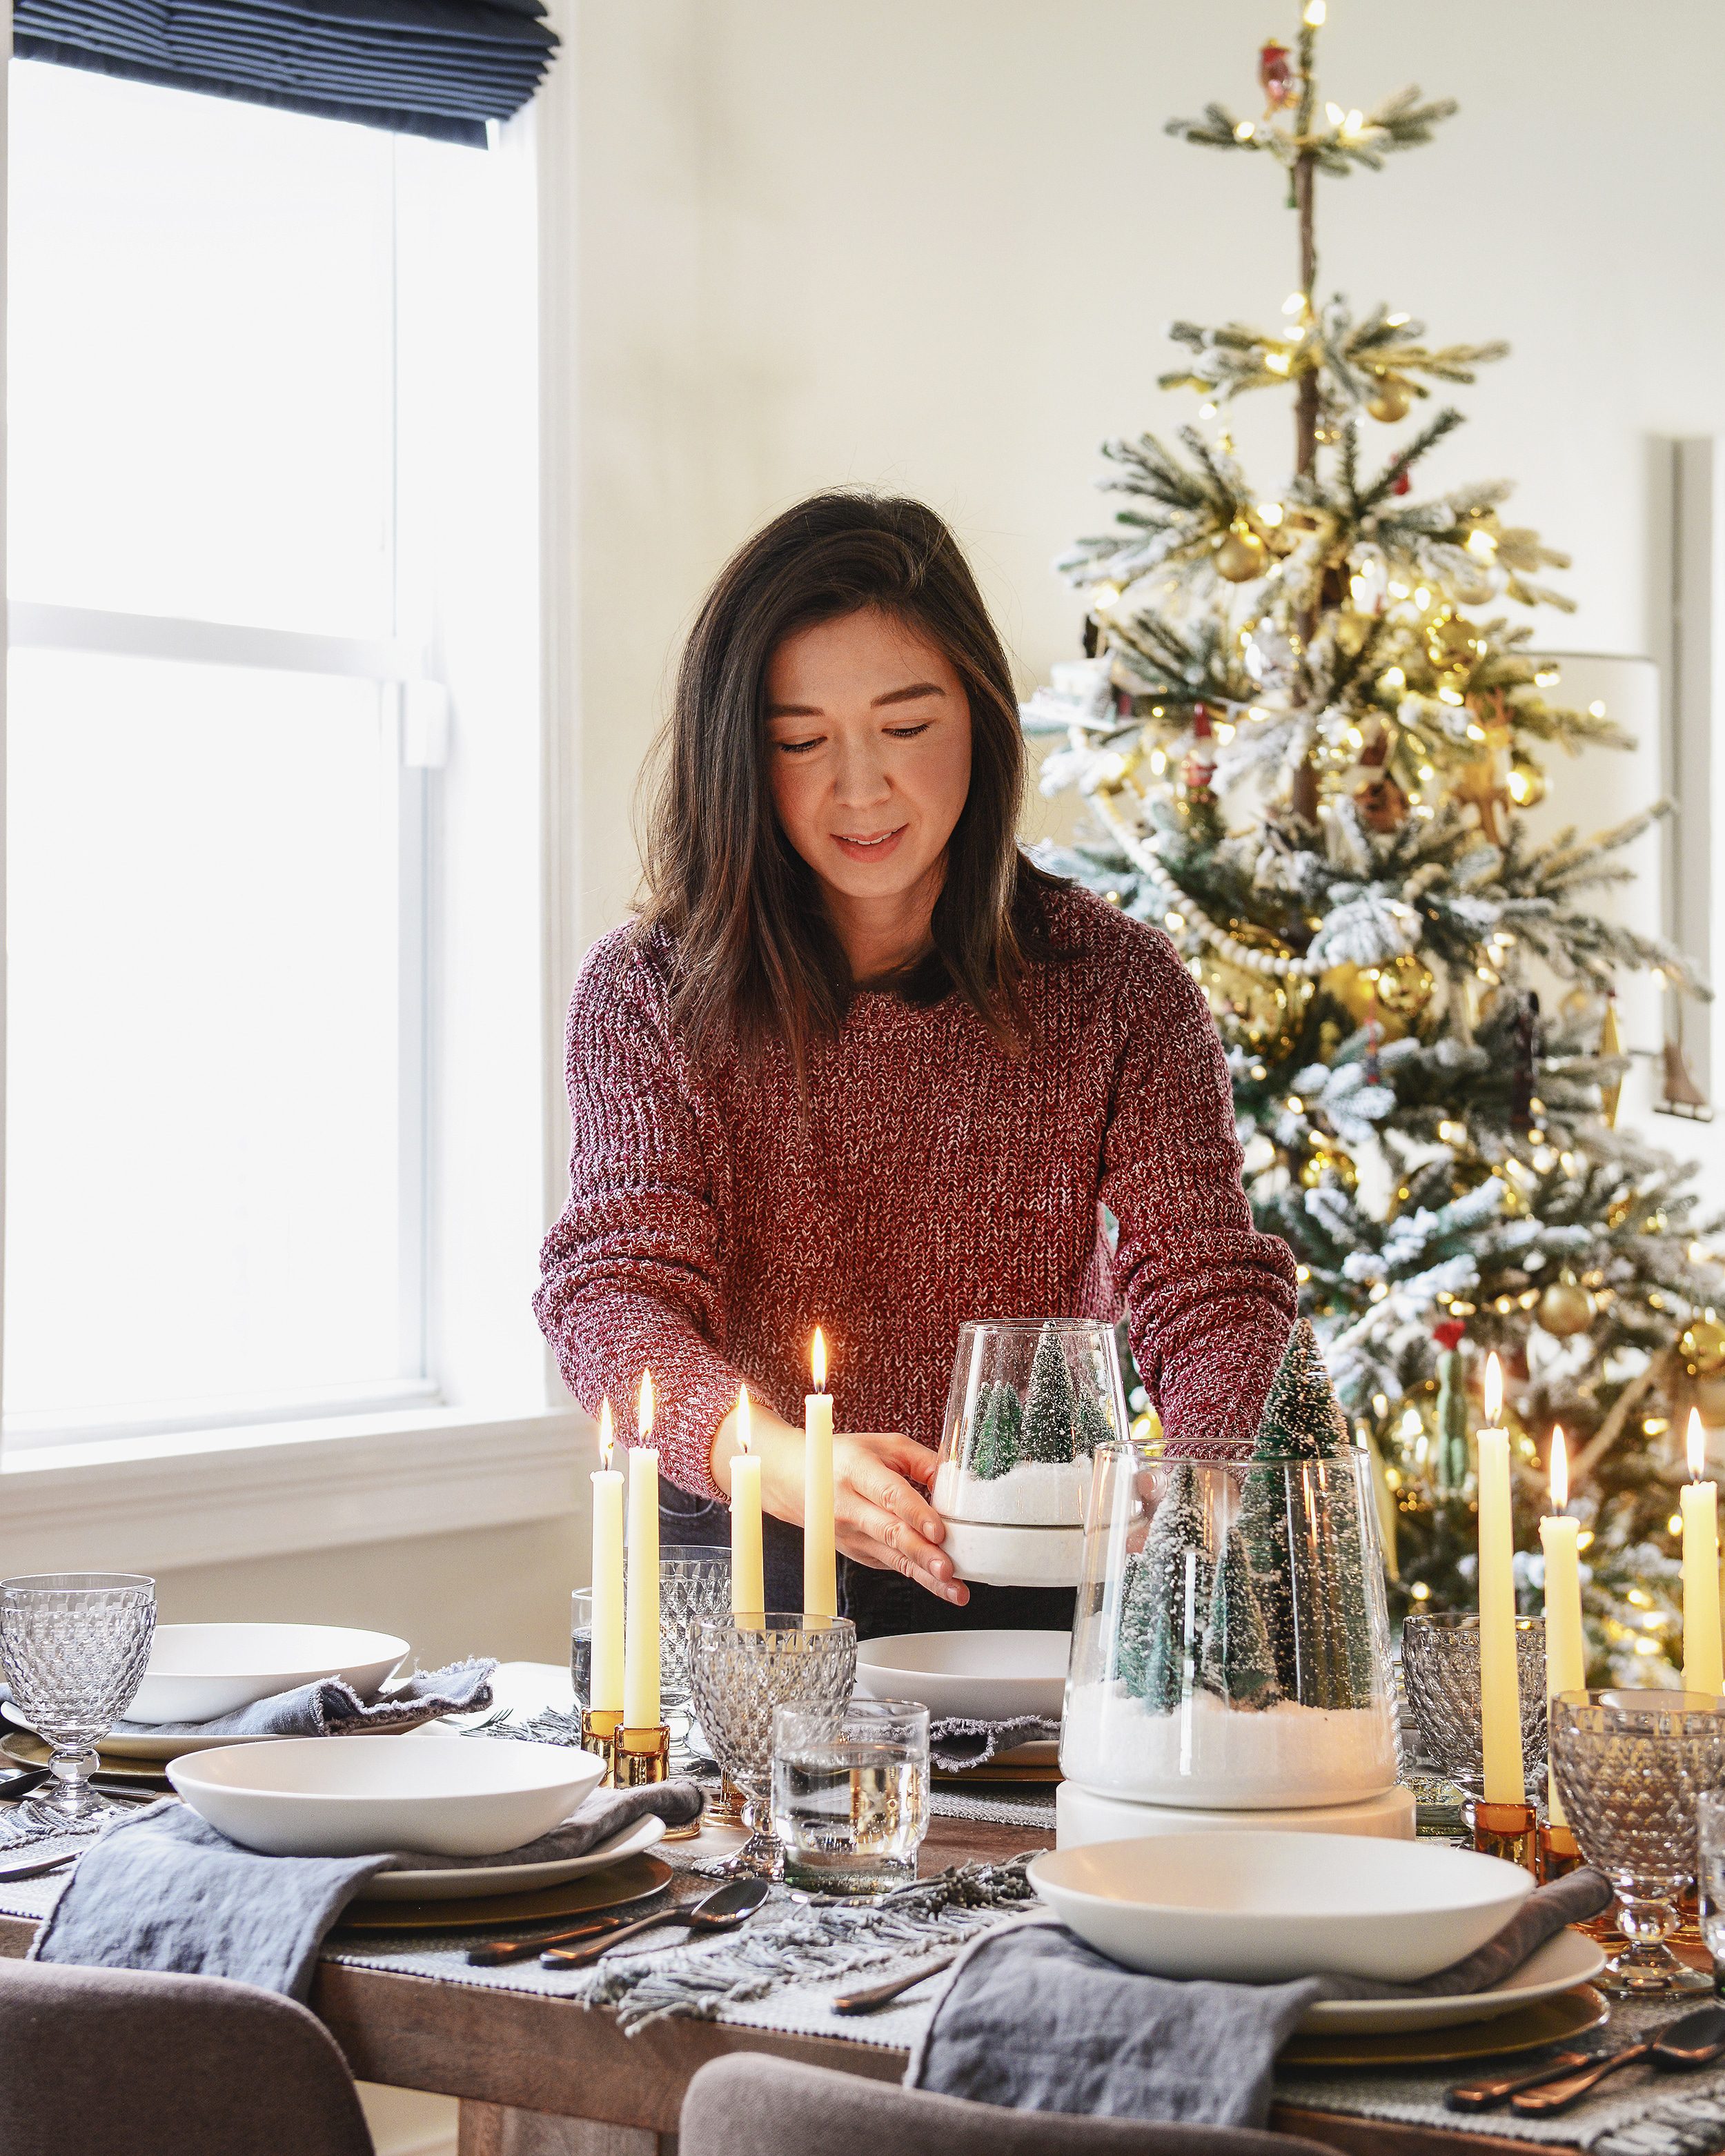 Homeowner setting down a centerpiece on the holiday themed dining table | This holiday season, consider simplifying your table setting with these 5 fresh styling tips! | via Yellow Brick Home